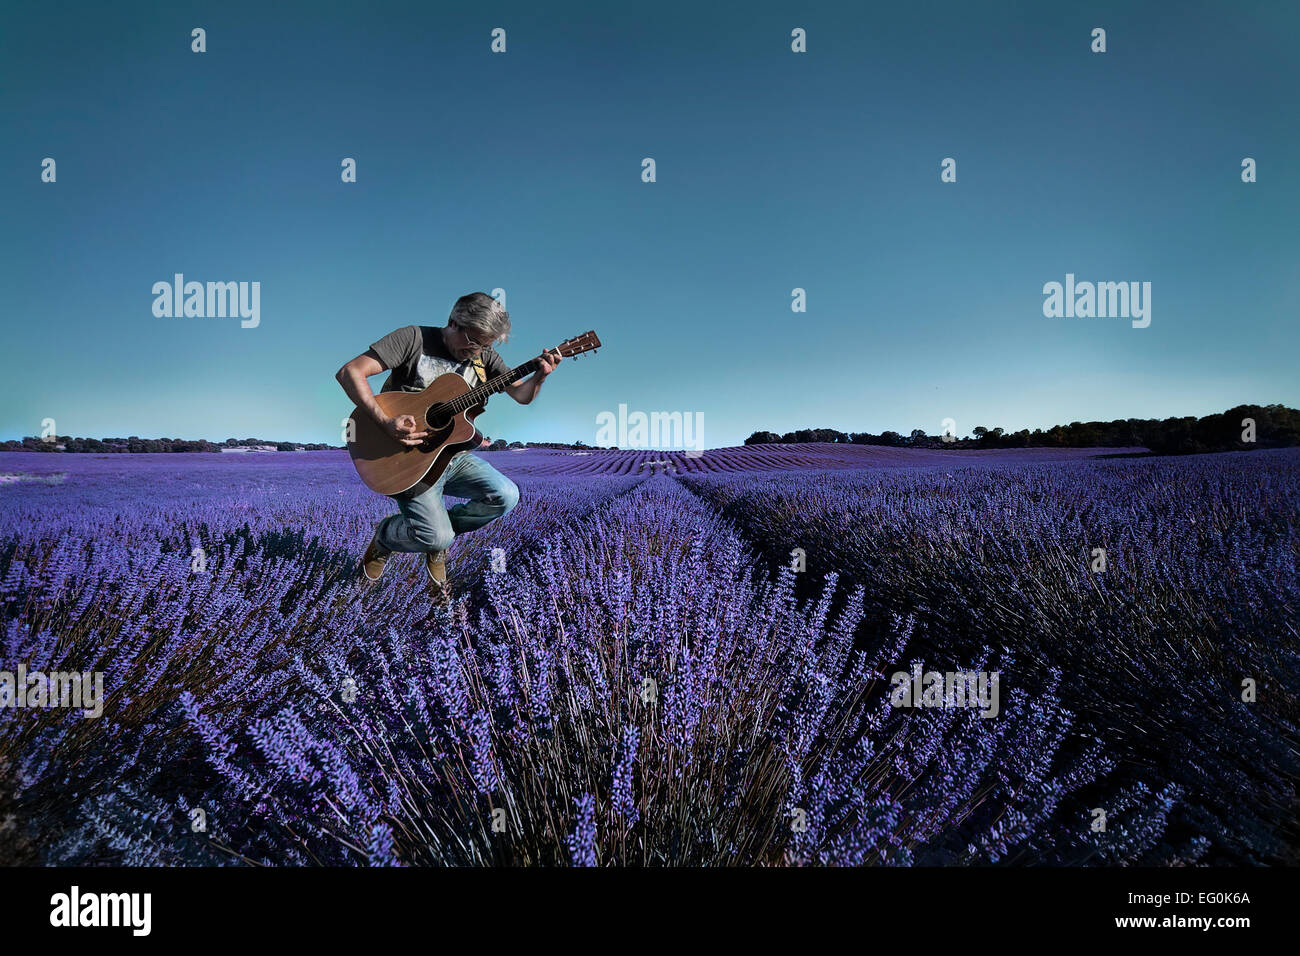 Man playing guitar in lavender field Banque D'Images